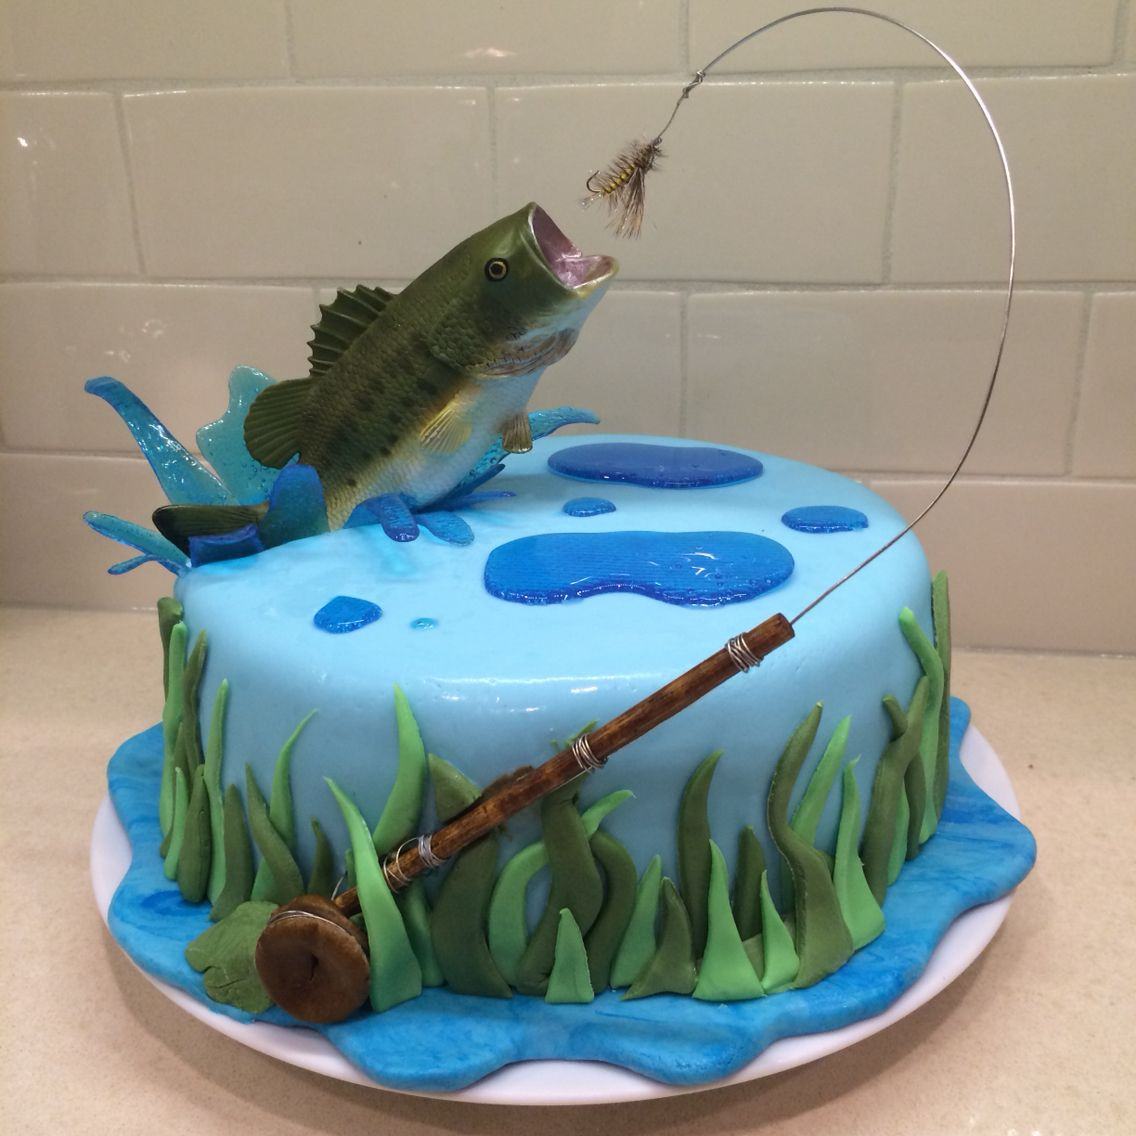 Fish Birthday Cakes
 Fly fishing cake for my hubby Bass jumping out of water